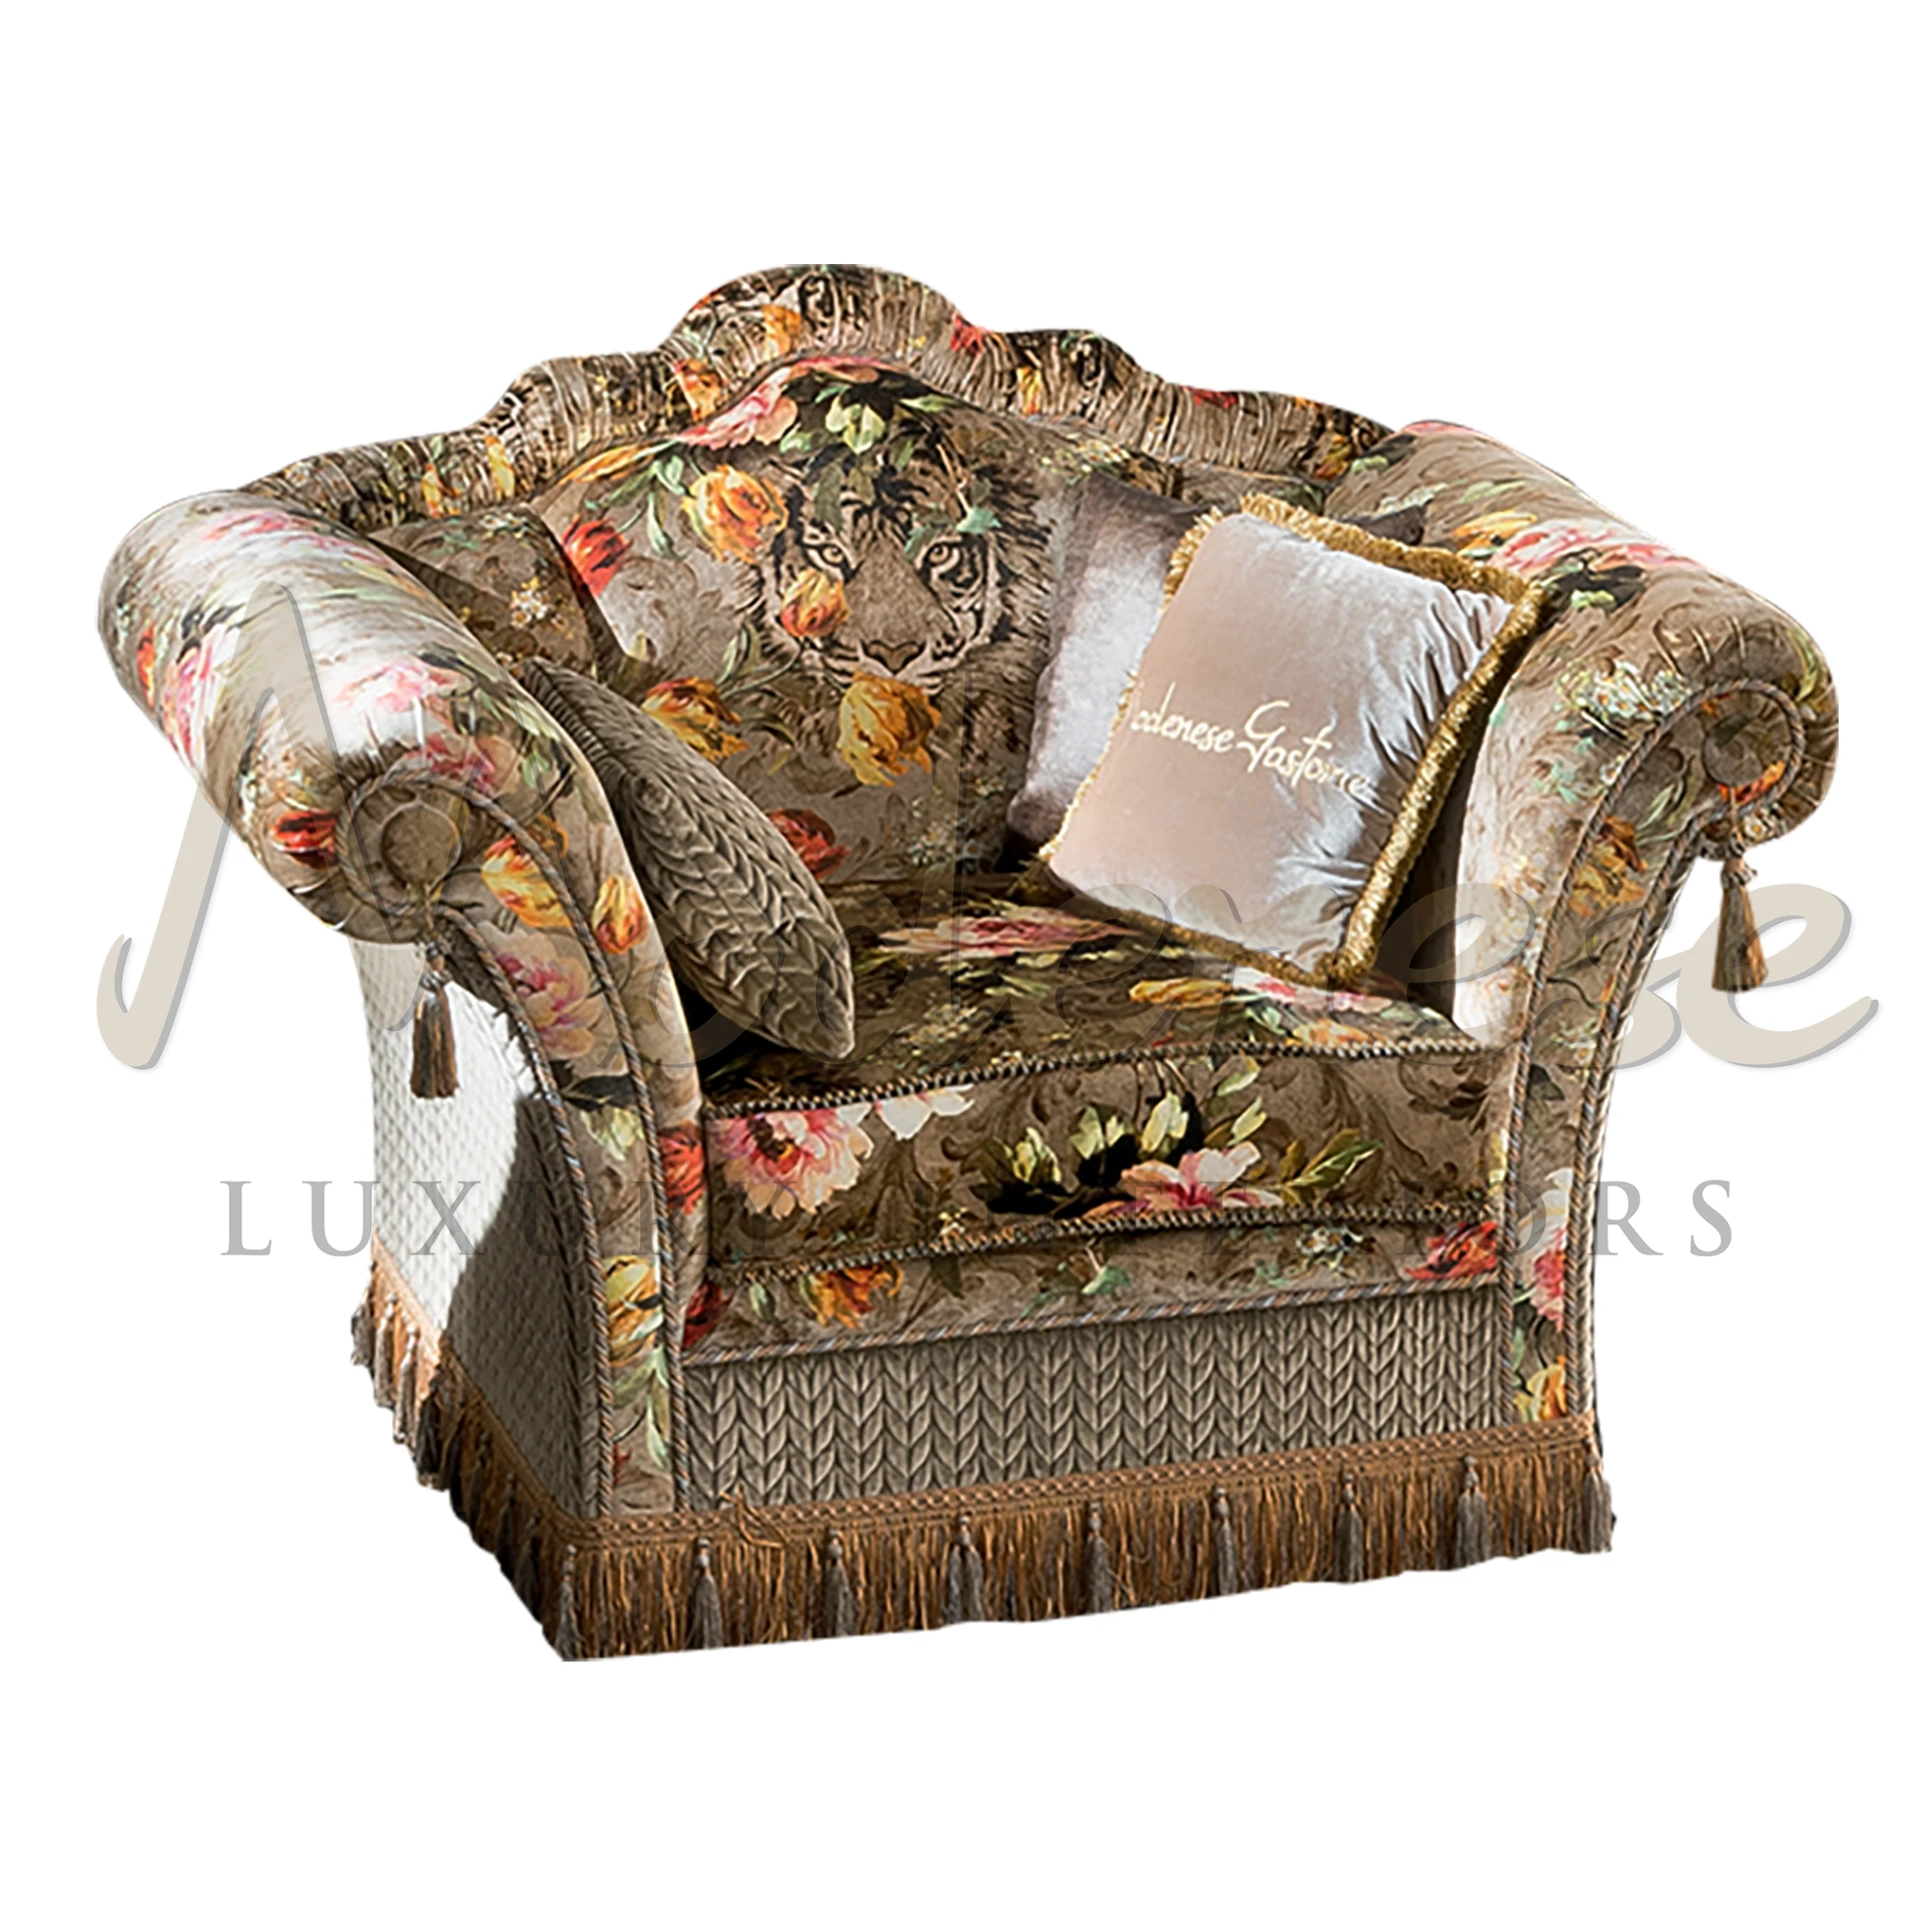 Elegant Floral Upholstered Armchair with intricate floral fabric design, adding a cozy and inviting touch to any room.